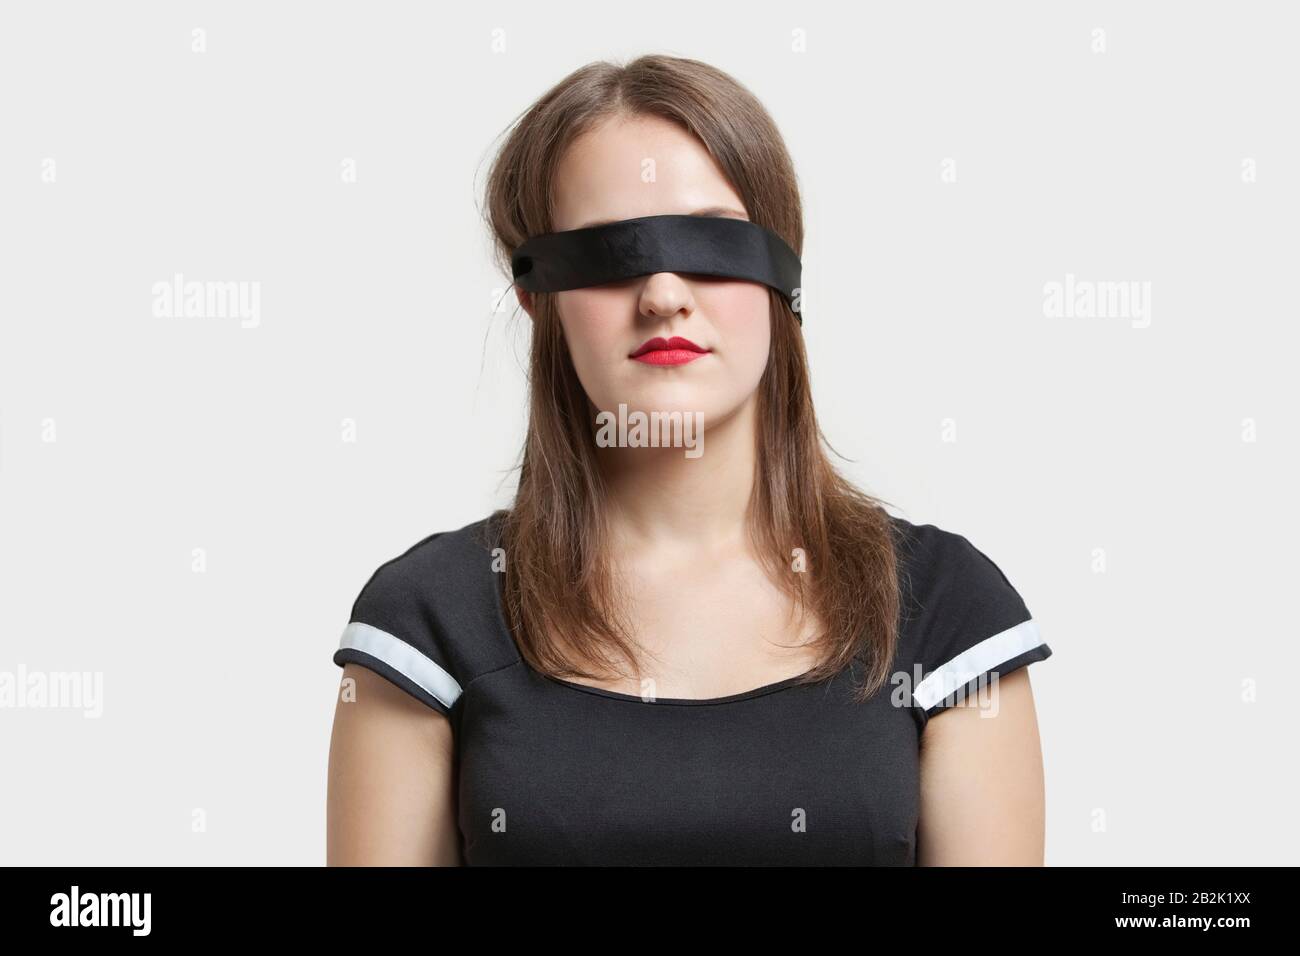 Young blindfolded woman Stock Photo by ©VGeorgiev 100898414